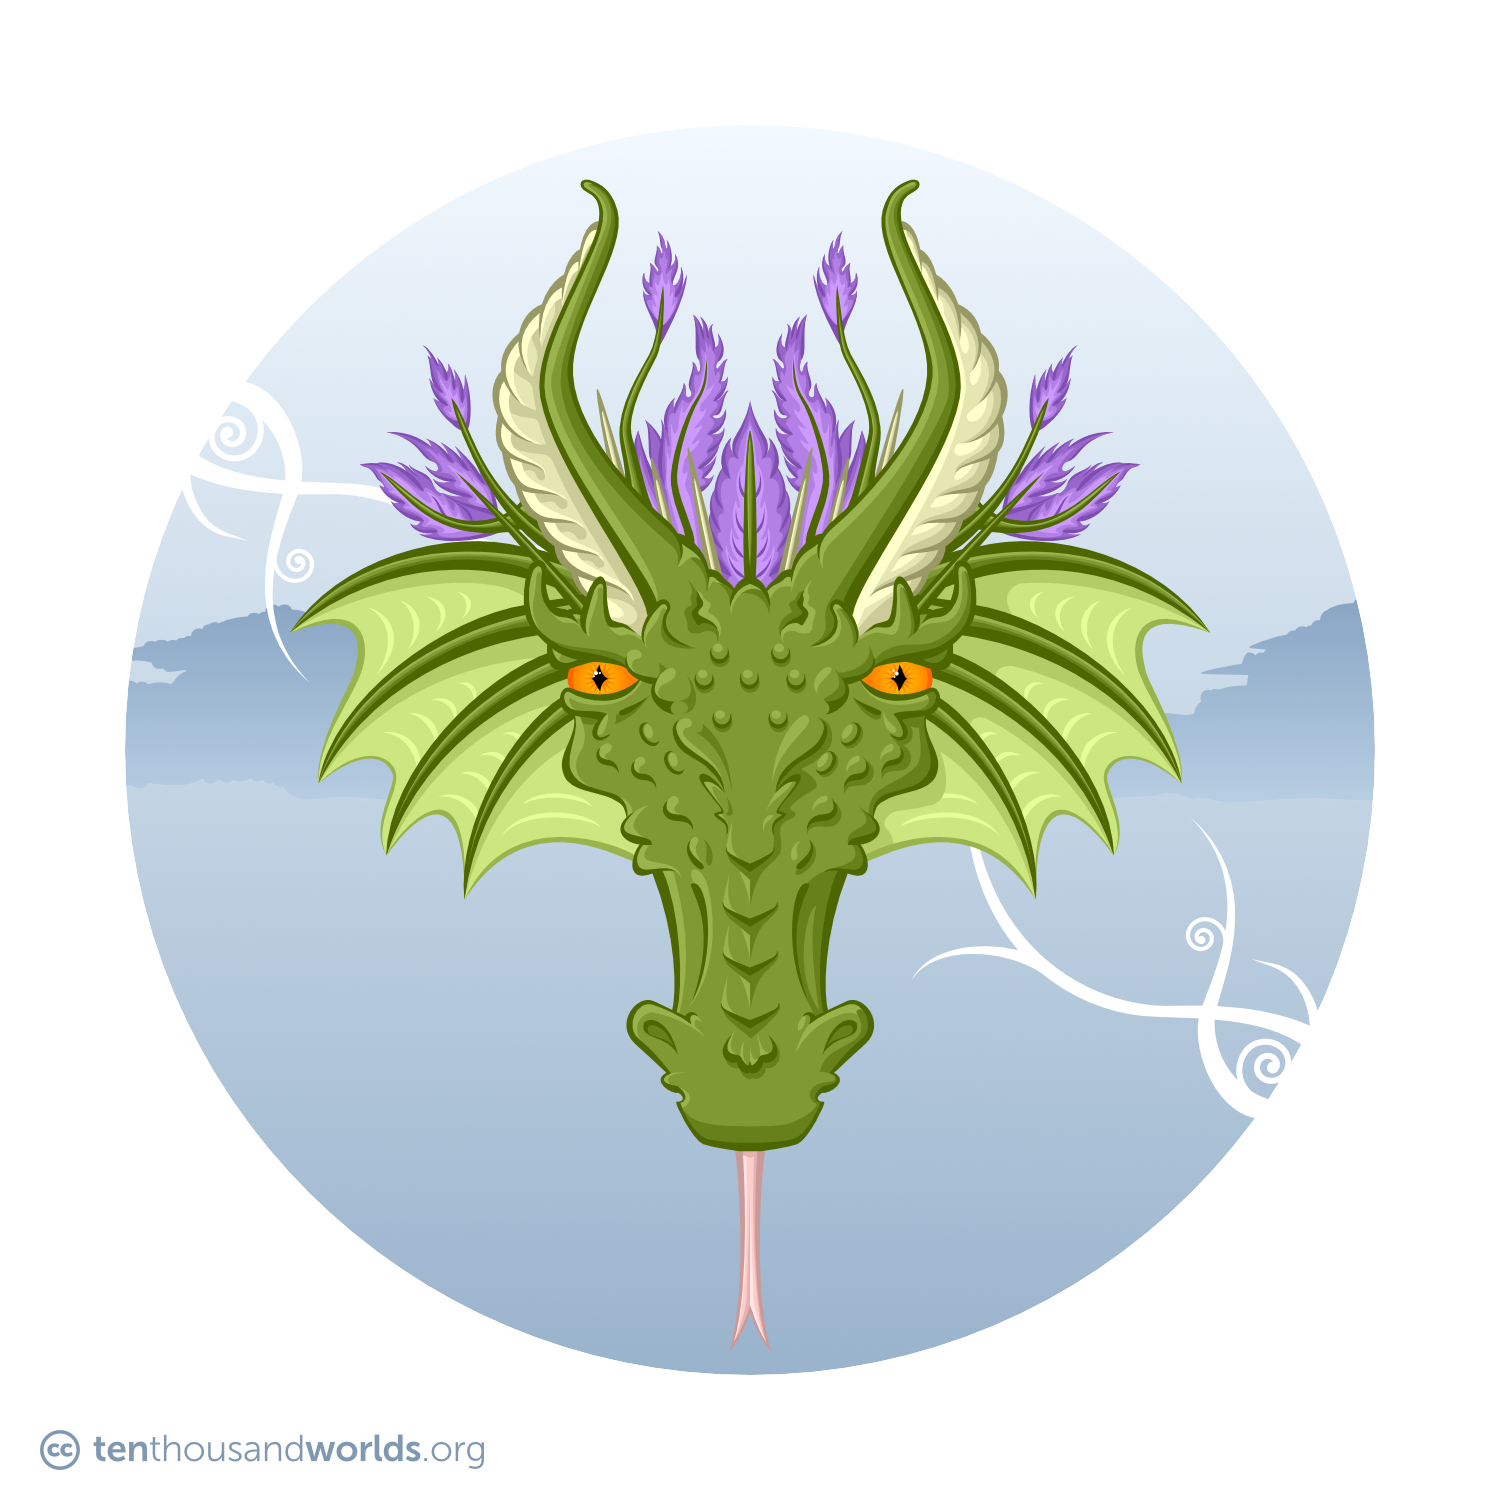 An elongated, green reptilian face with frills, violet feathers, ivory spikes, a pair of curved-back horns, golden eyes, and a forked pink tongue.